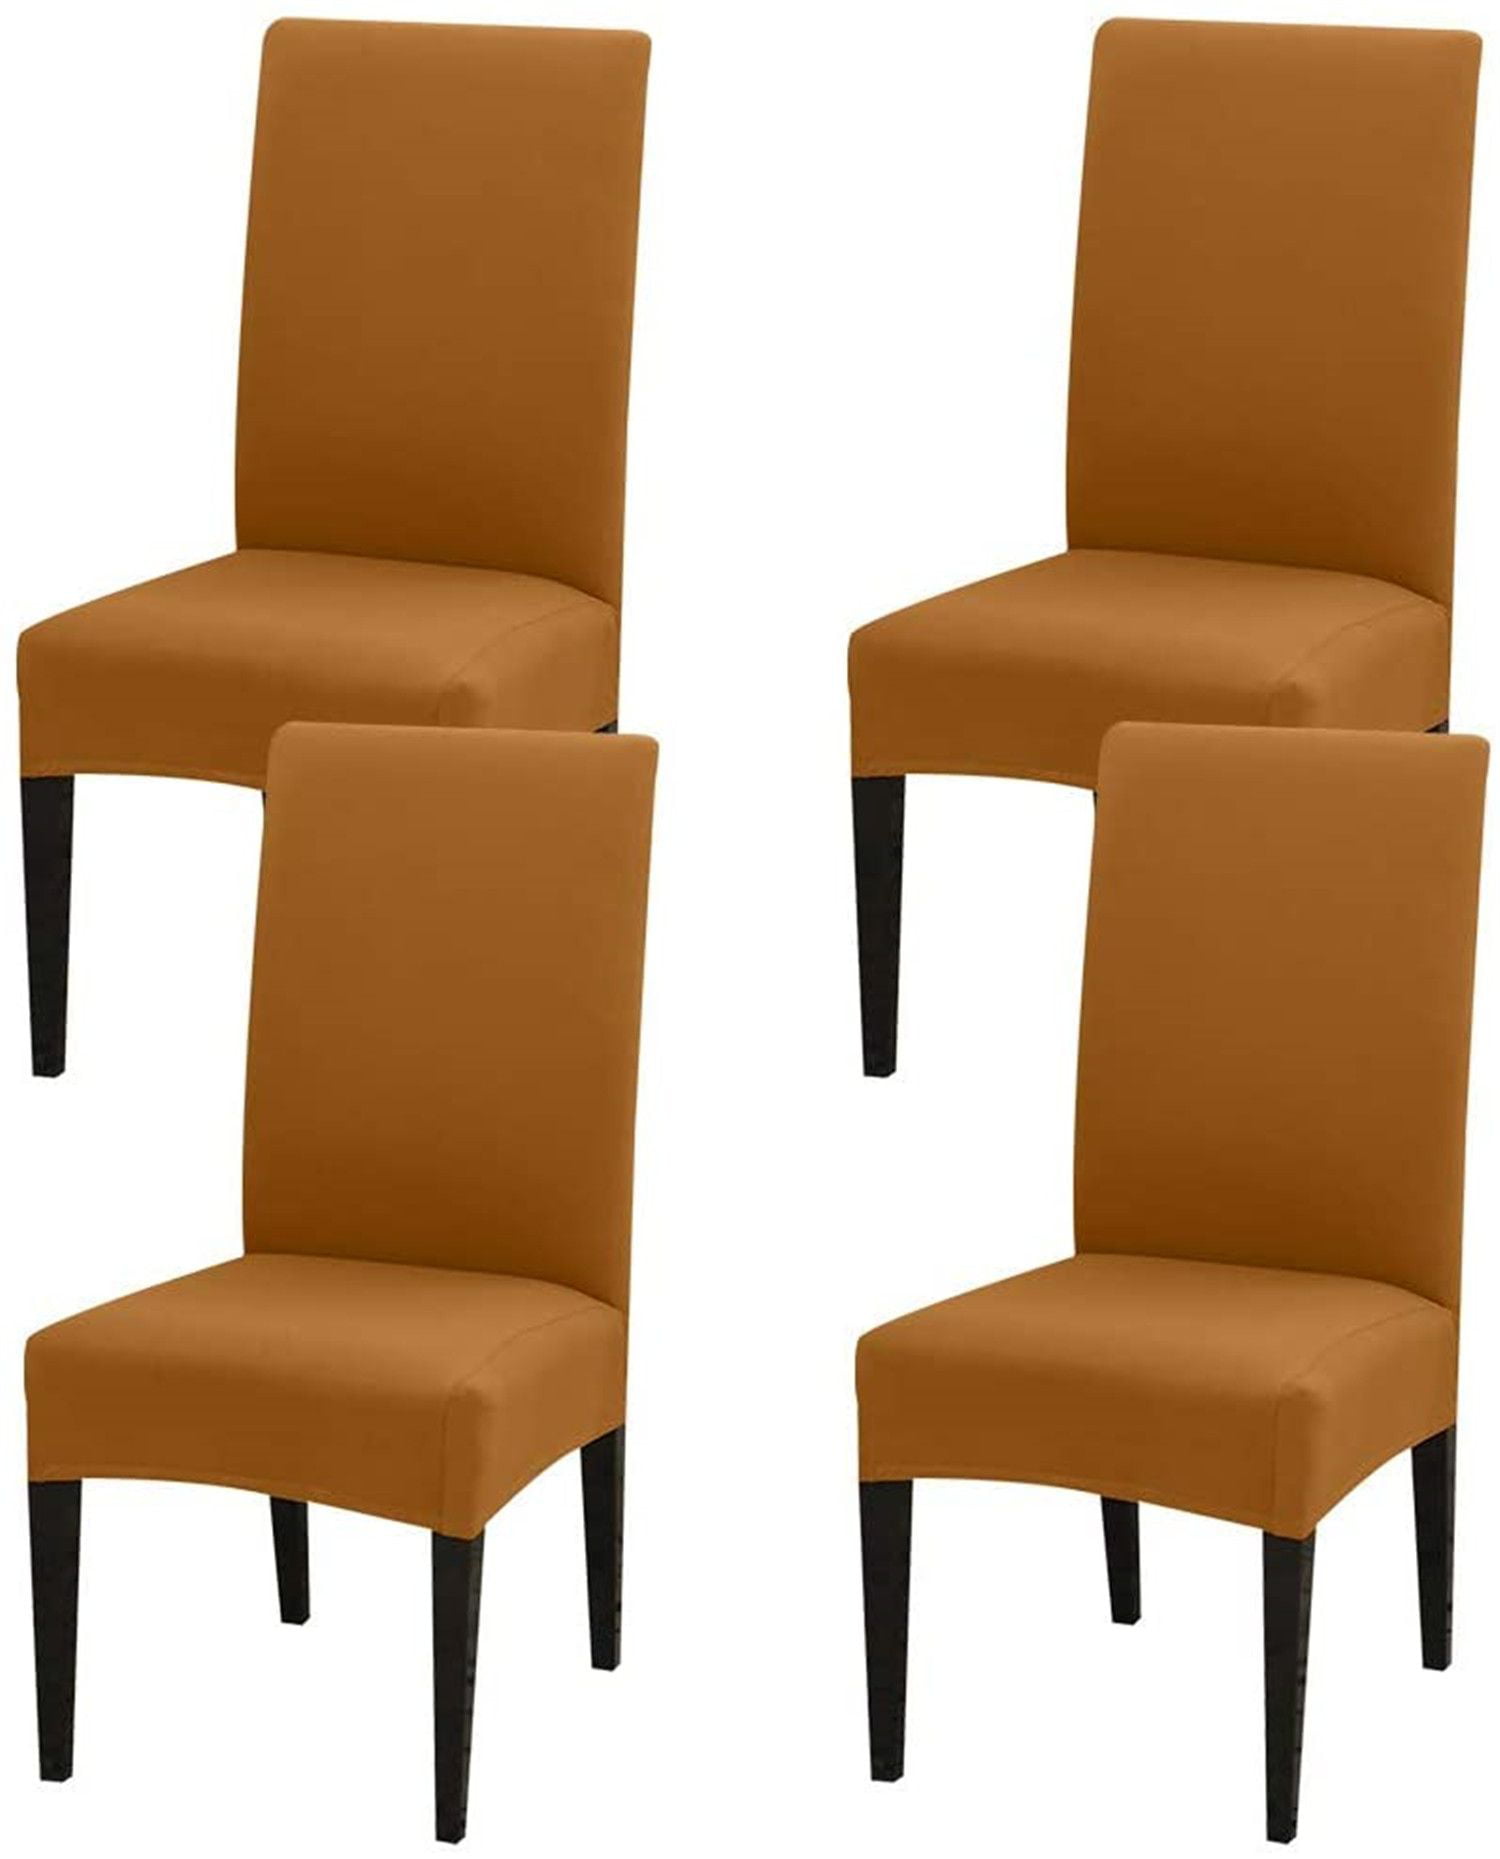 Set of 4 Yunhigh Stretchy Dining Chair Slipcovers Removable Chair Protective Covers for Dining Room Ceremony Banquet Hotel 